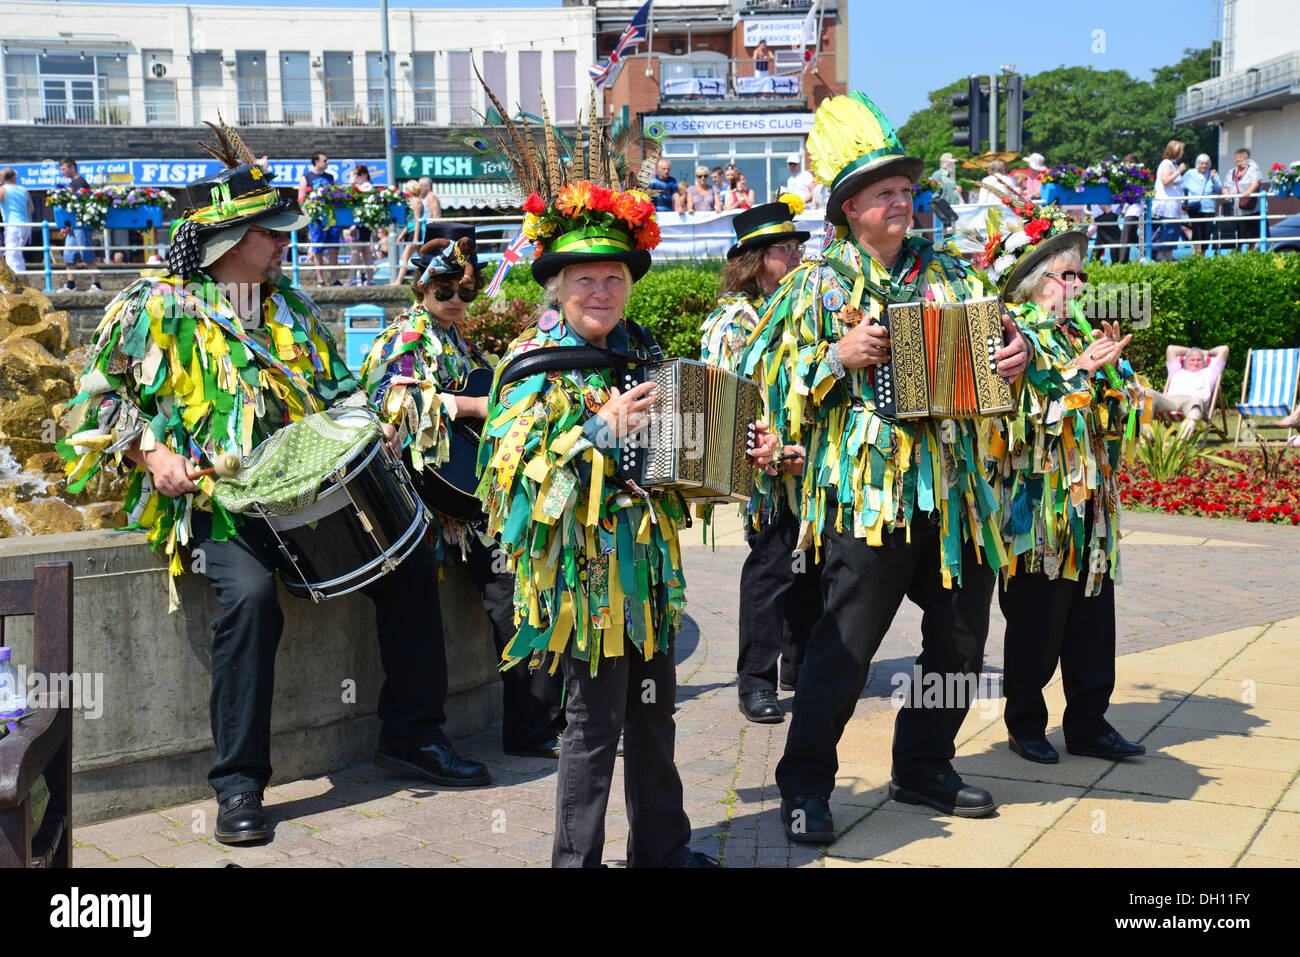 Morris dancing troupe performing on seafront promenade, Skegness, Lincolnshire, England, United Kingdom Stock Photo